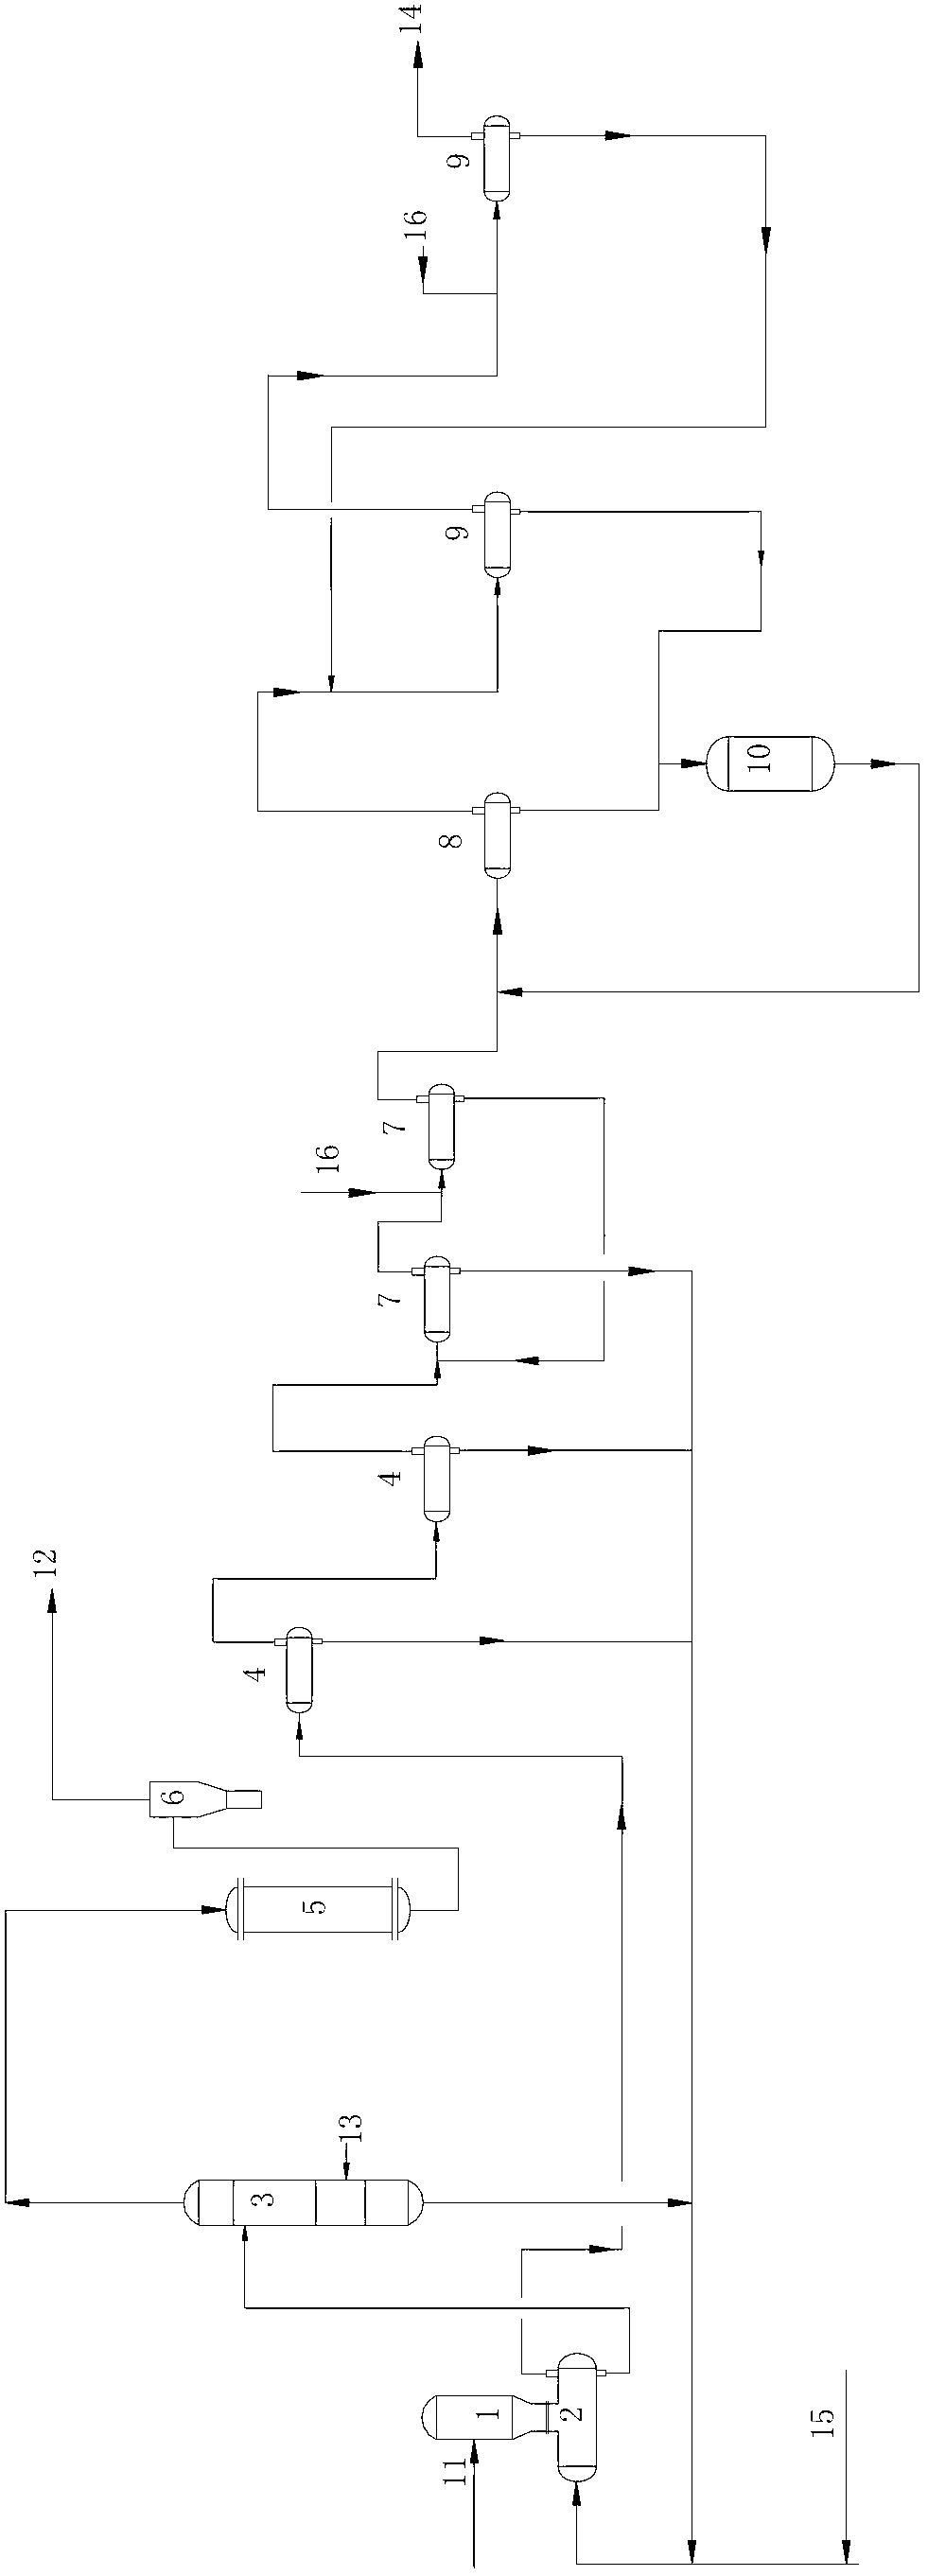 Method of continuous concentrated acid hydrolysis of organochlorosilane